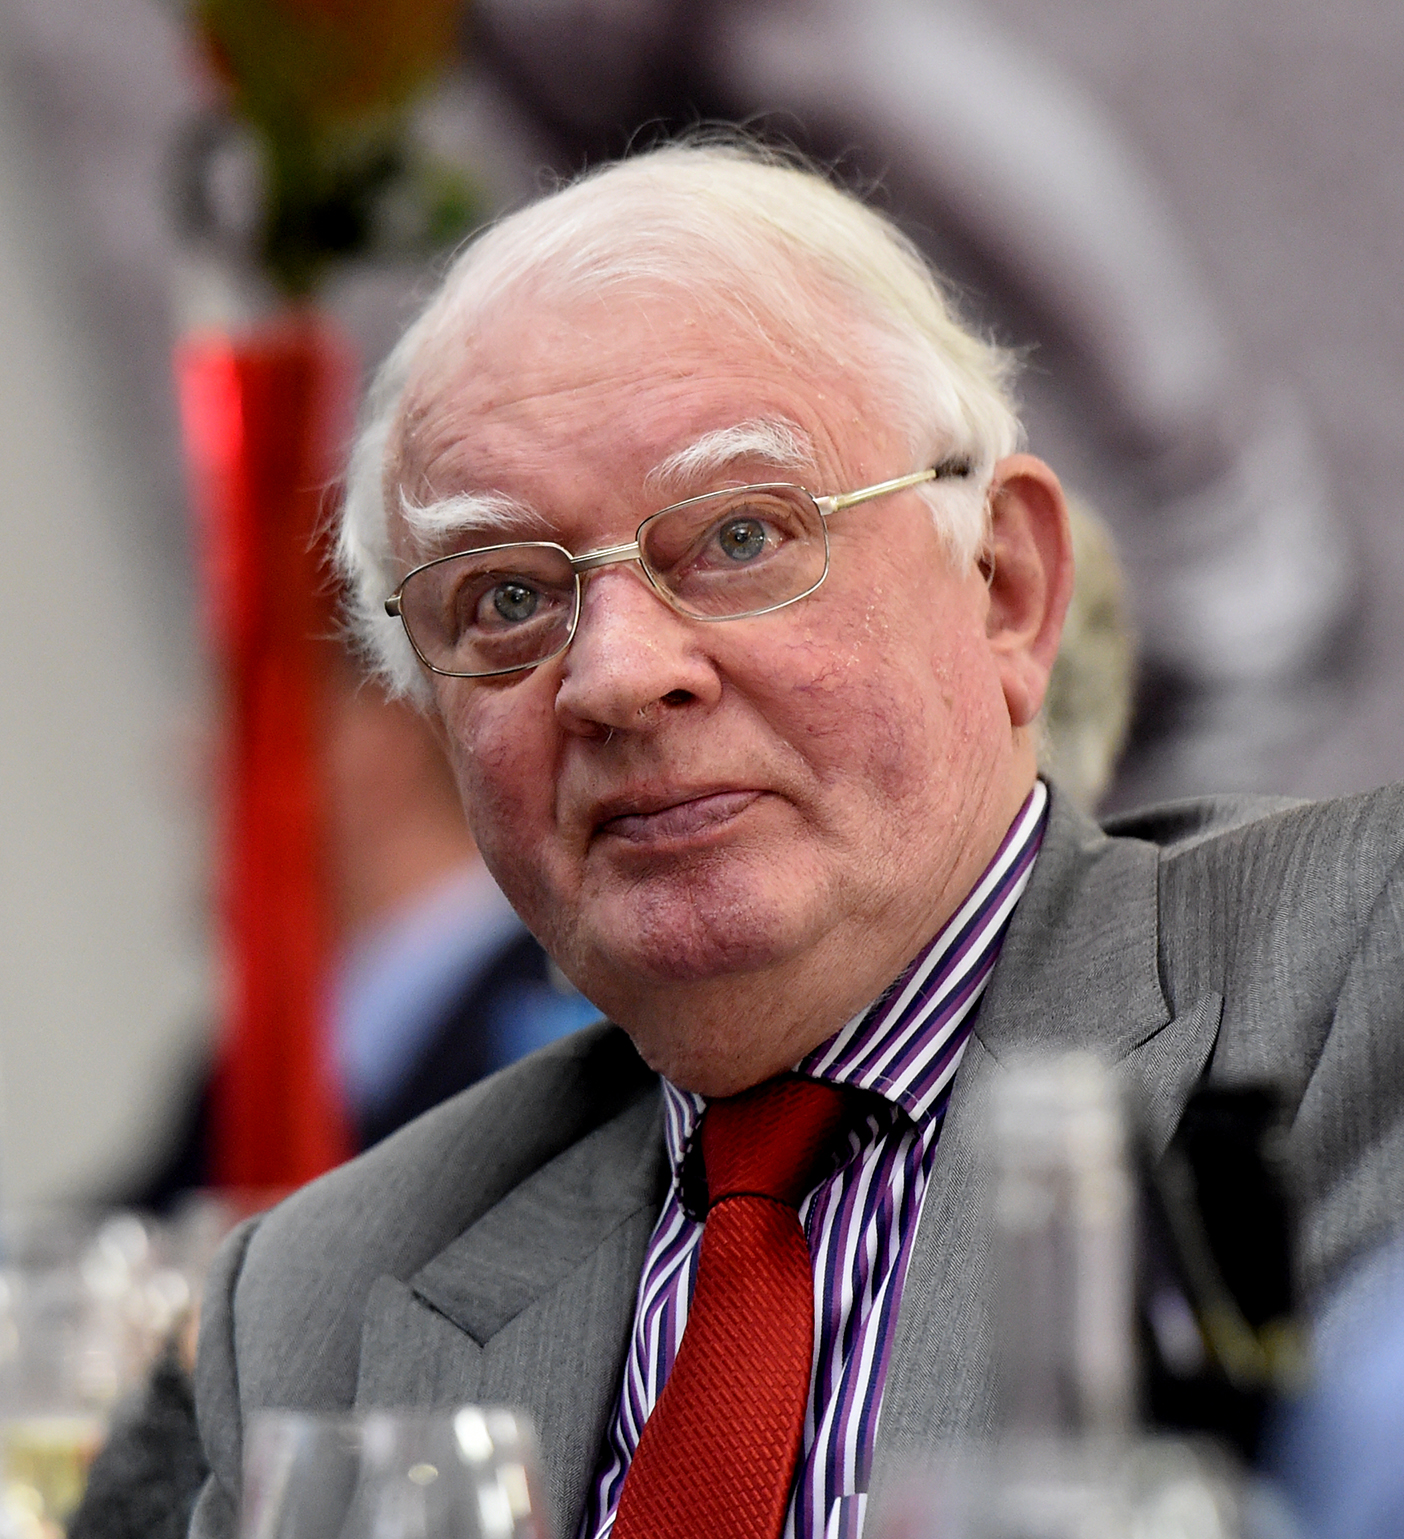 Civil rights activist and SDLP Founder Austin Currie has died